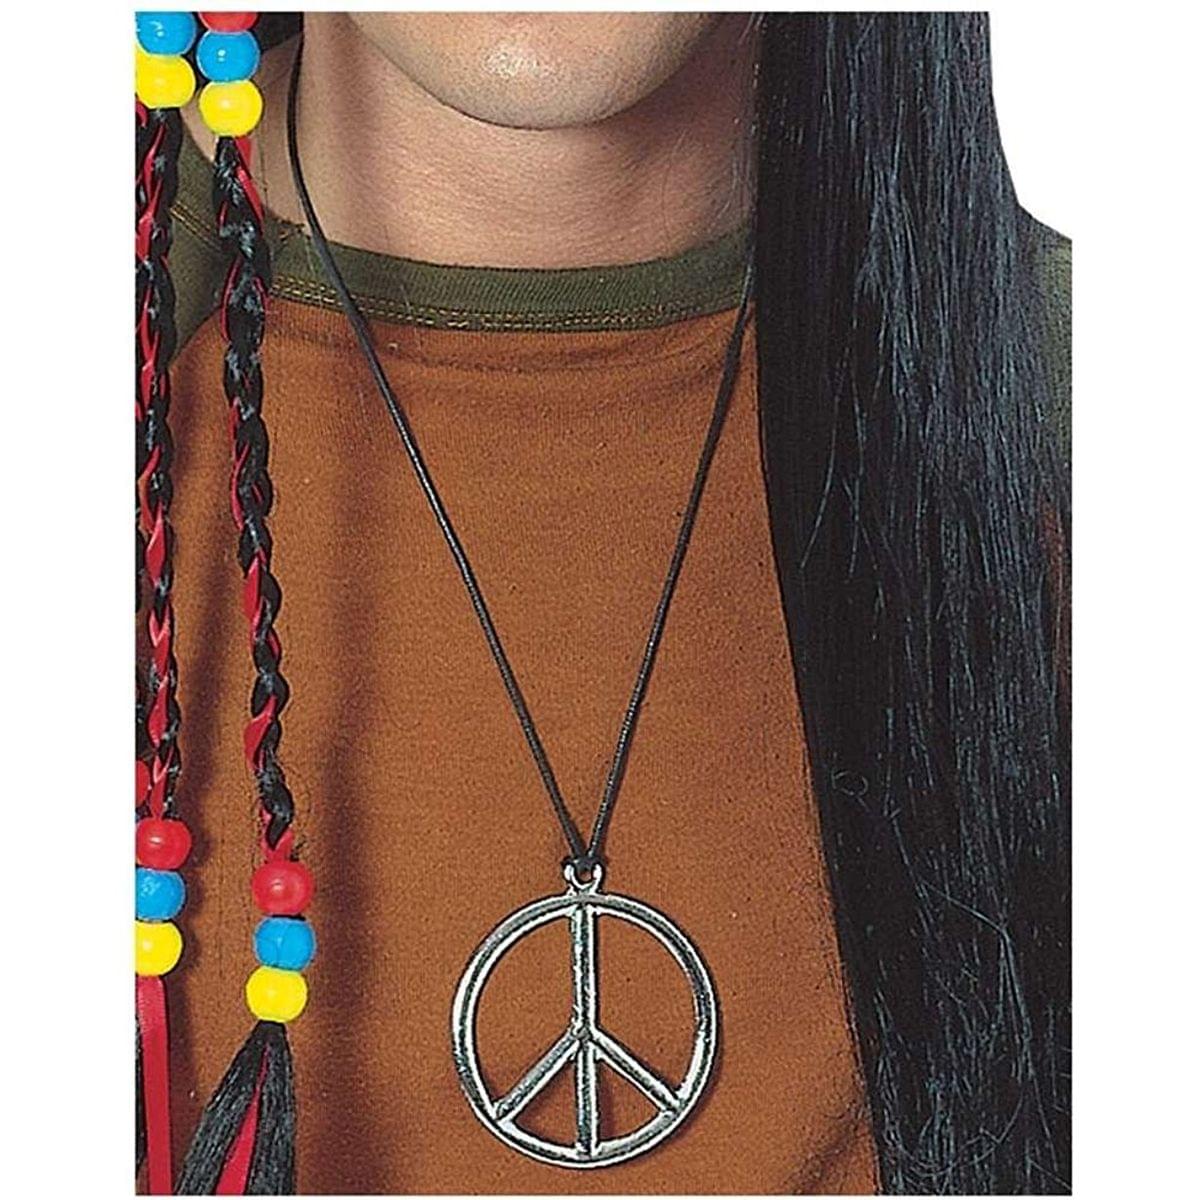 Peace Pendant Medal Costume Accessory Adult One Size